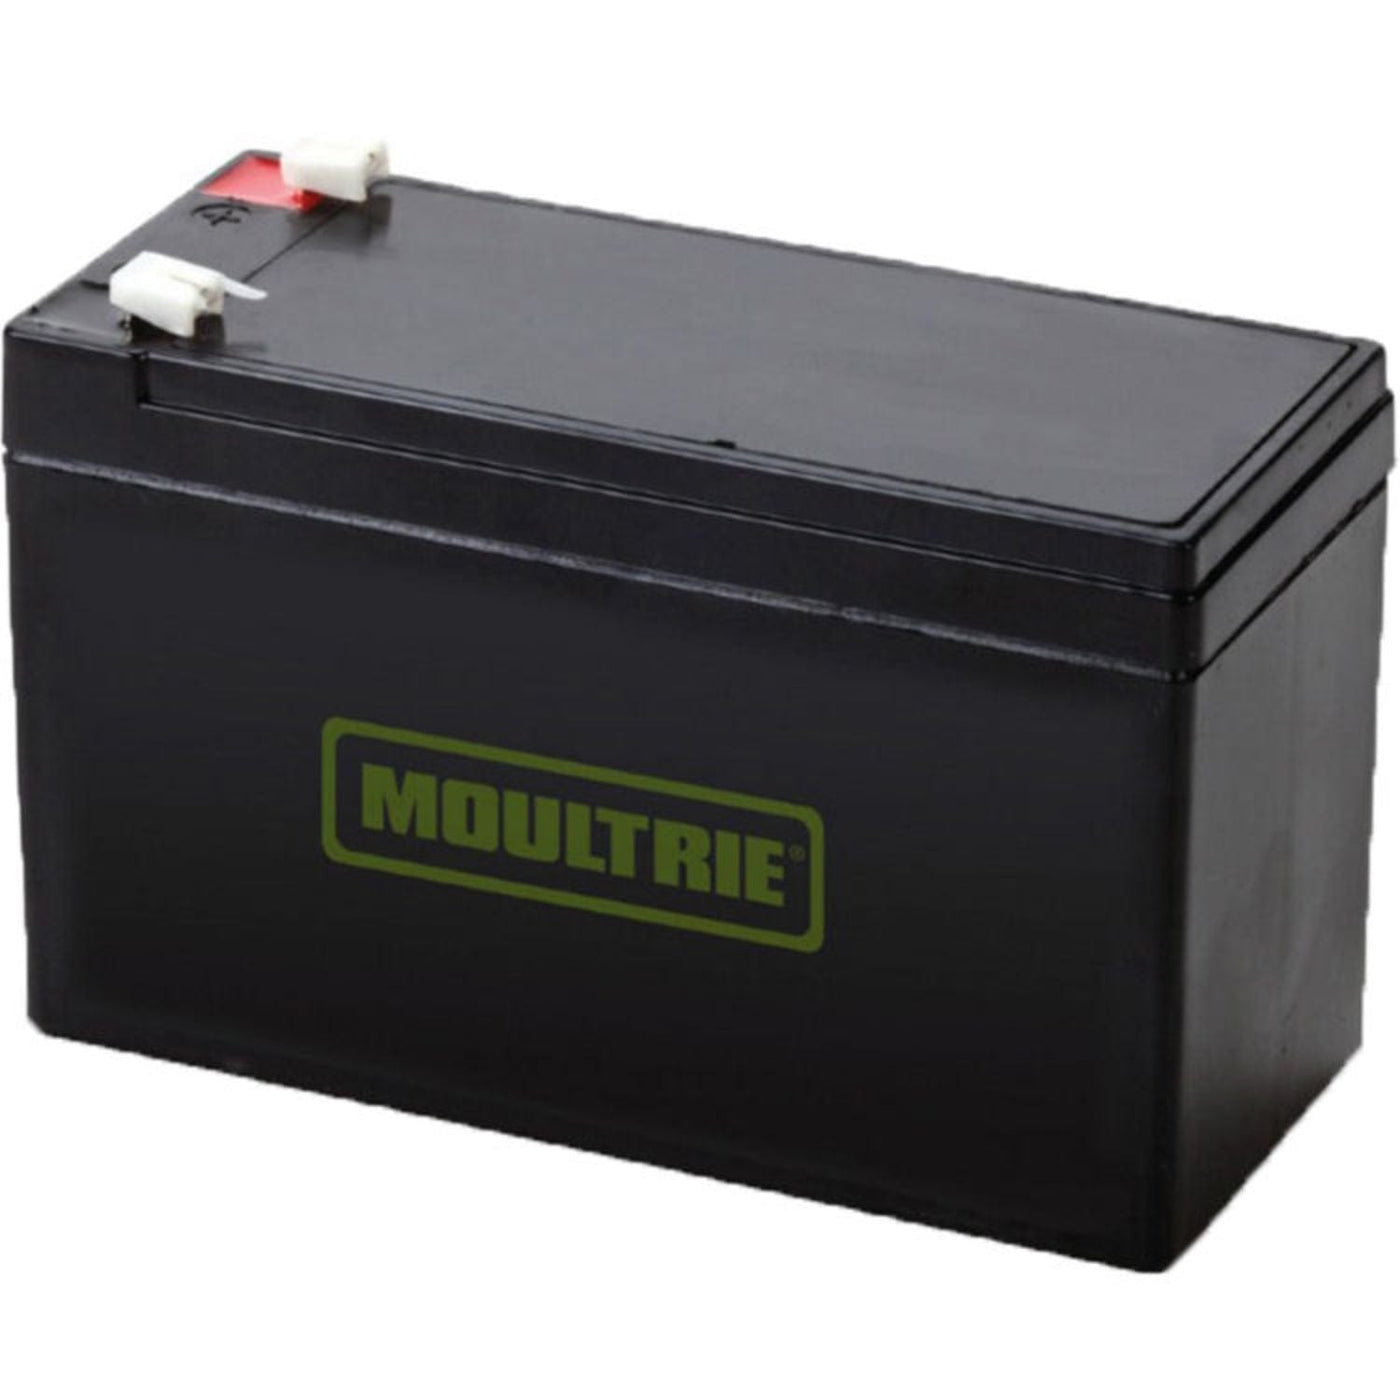 Moultrie 12-volt Rechargeable Battery Lights